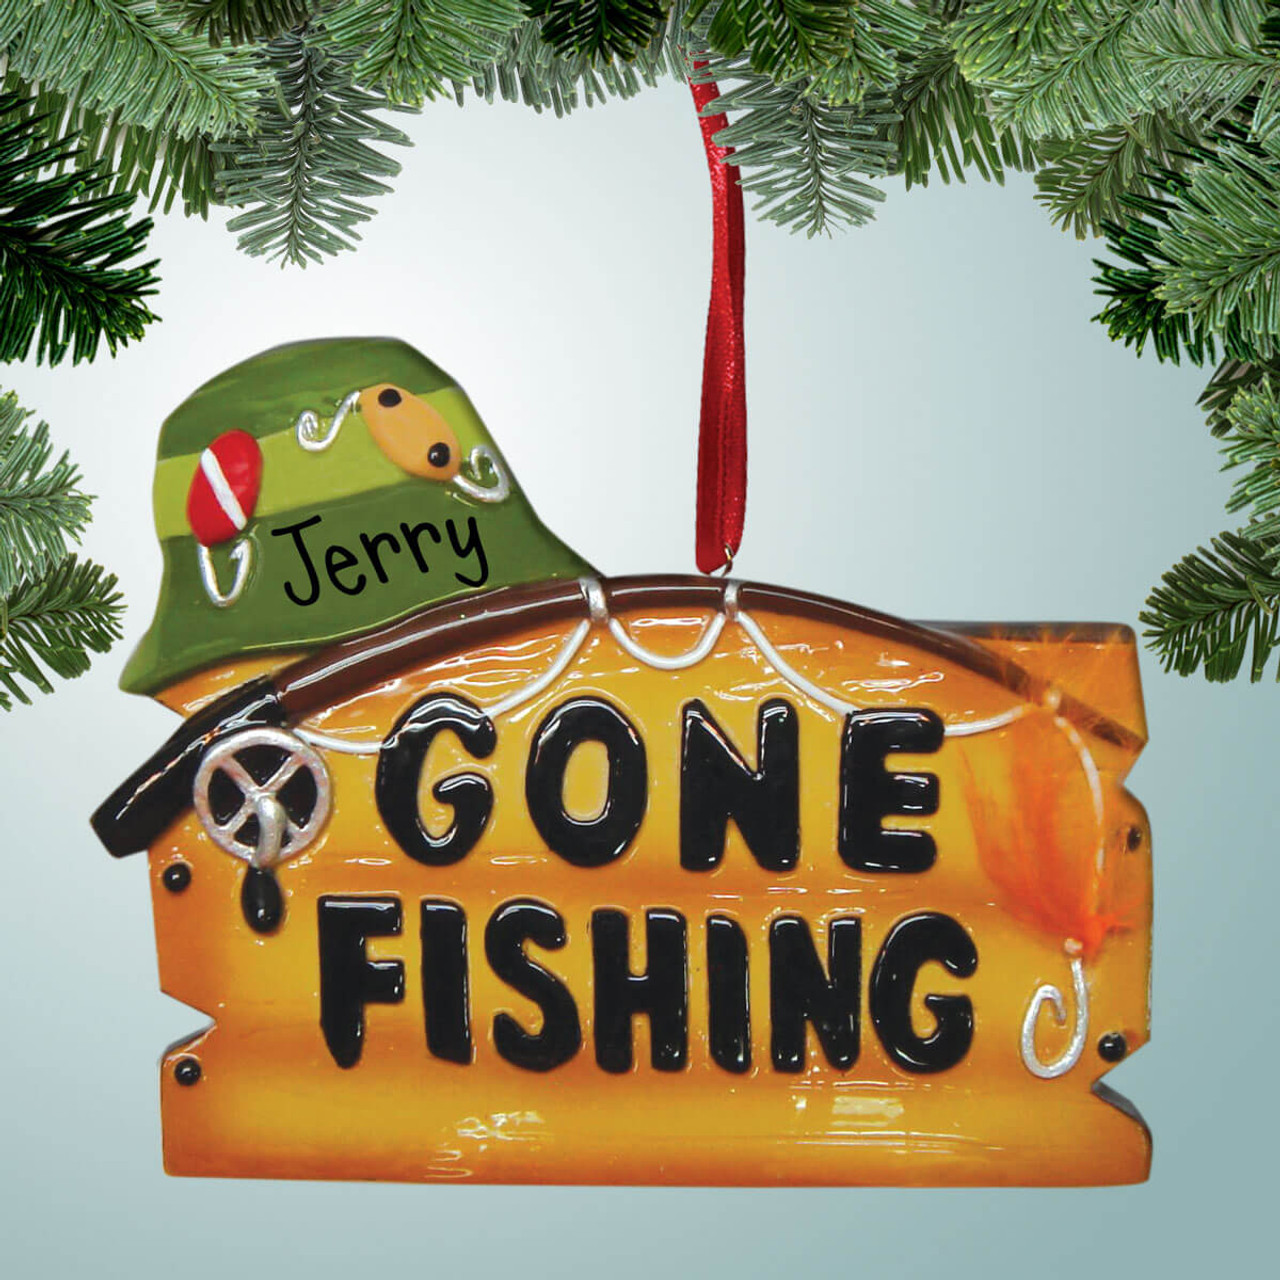 Gone Fishing Sign Printable - Customize and Print